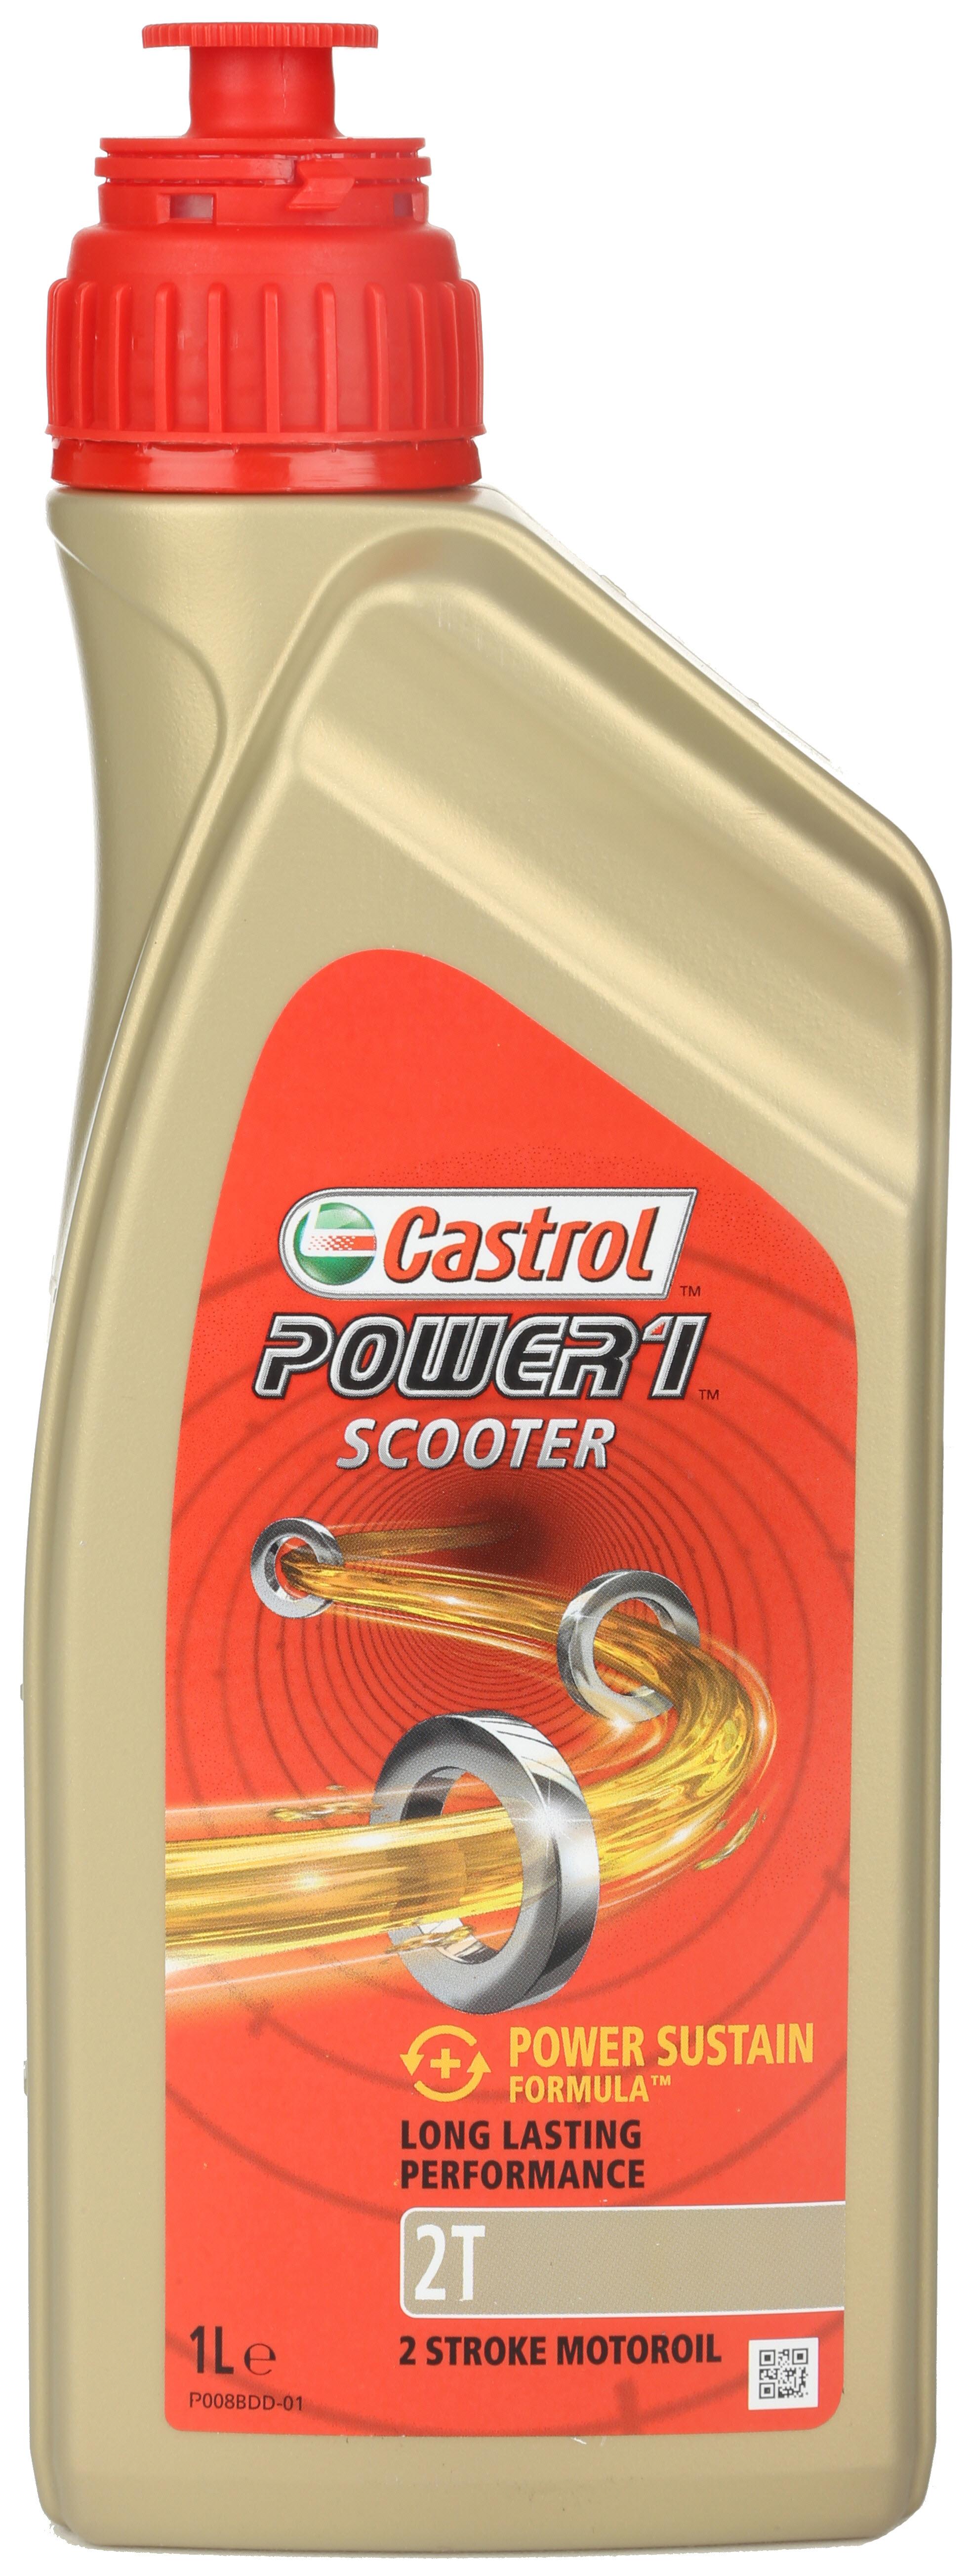 Castrol Power 1 Scooter 2T Scooter Engine Oil - 1Ltr